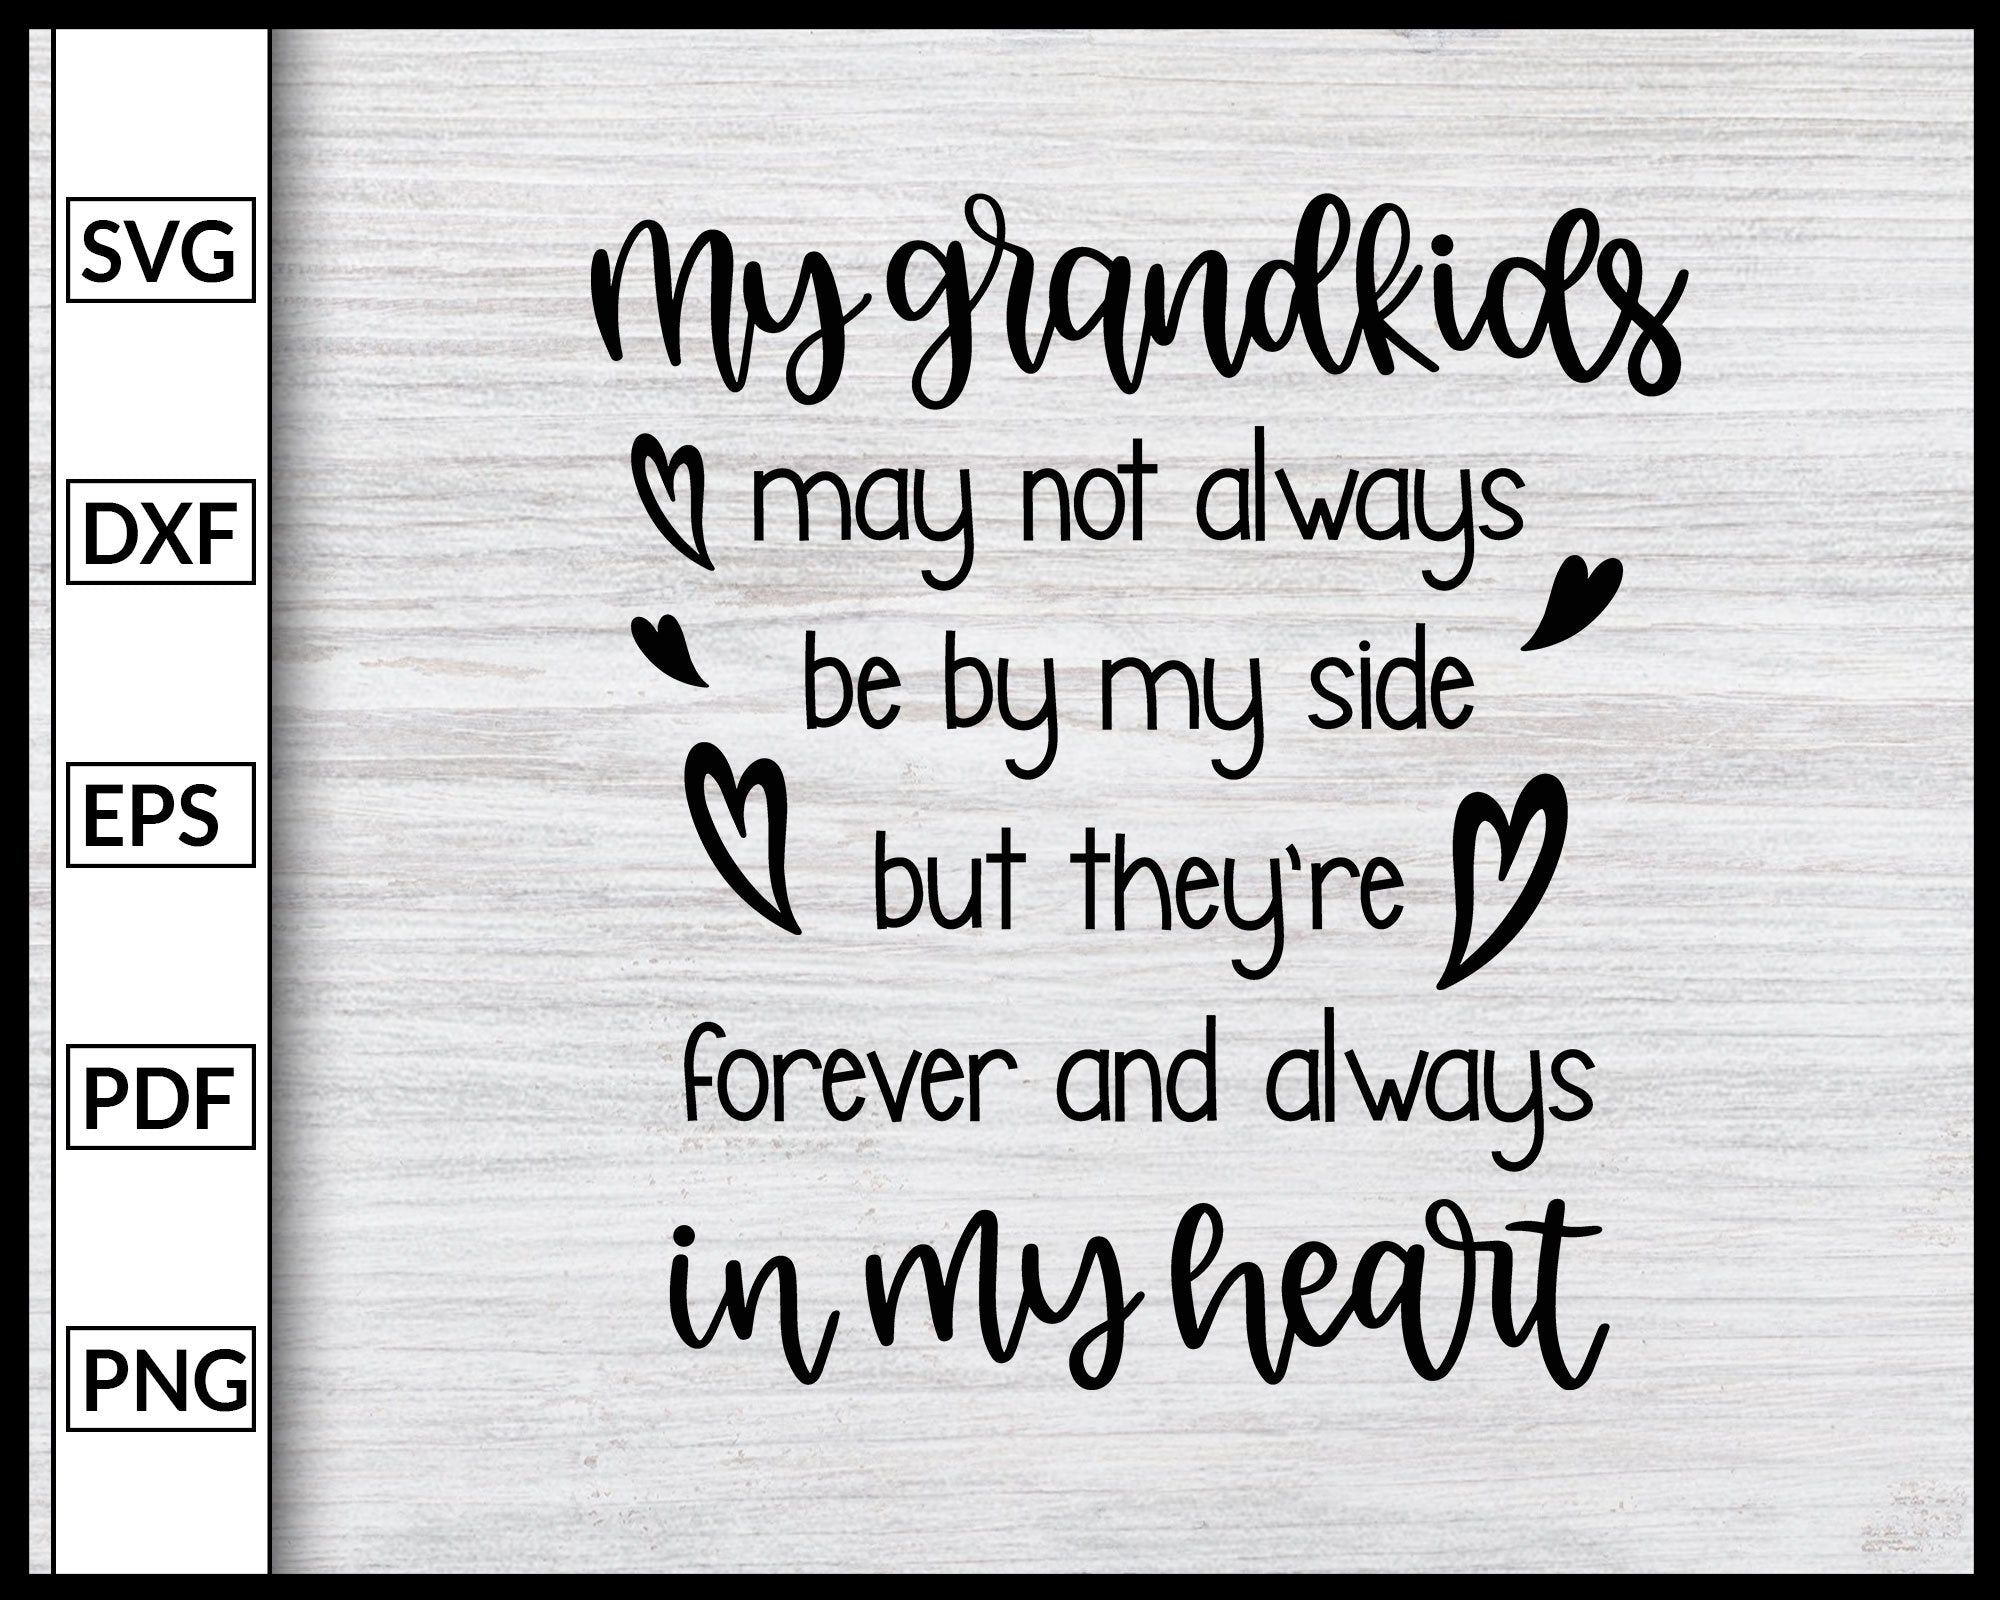 Download My Grandkids Svg Inspirational Quotes Svg Family Quotes Svg Cut File F Editable Svg File